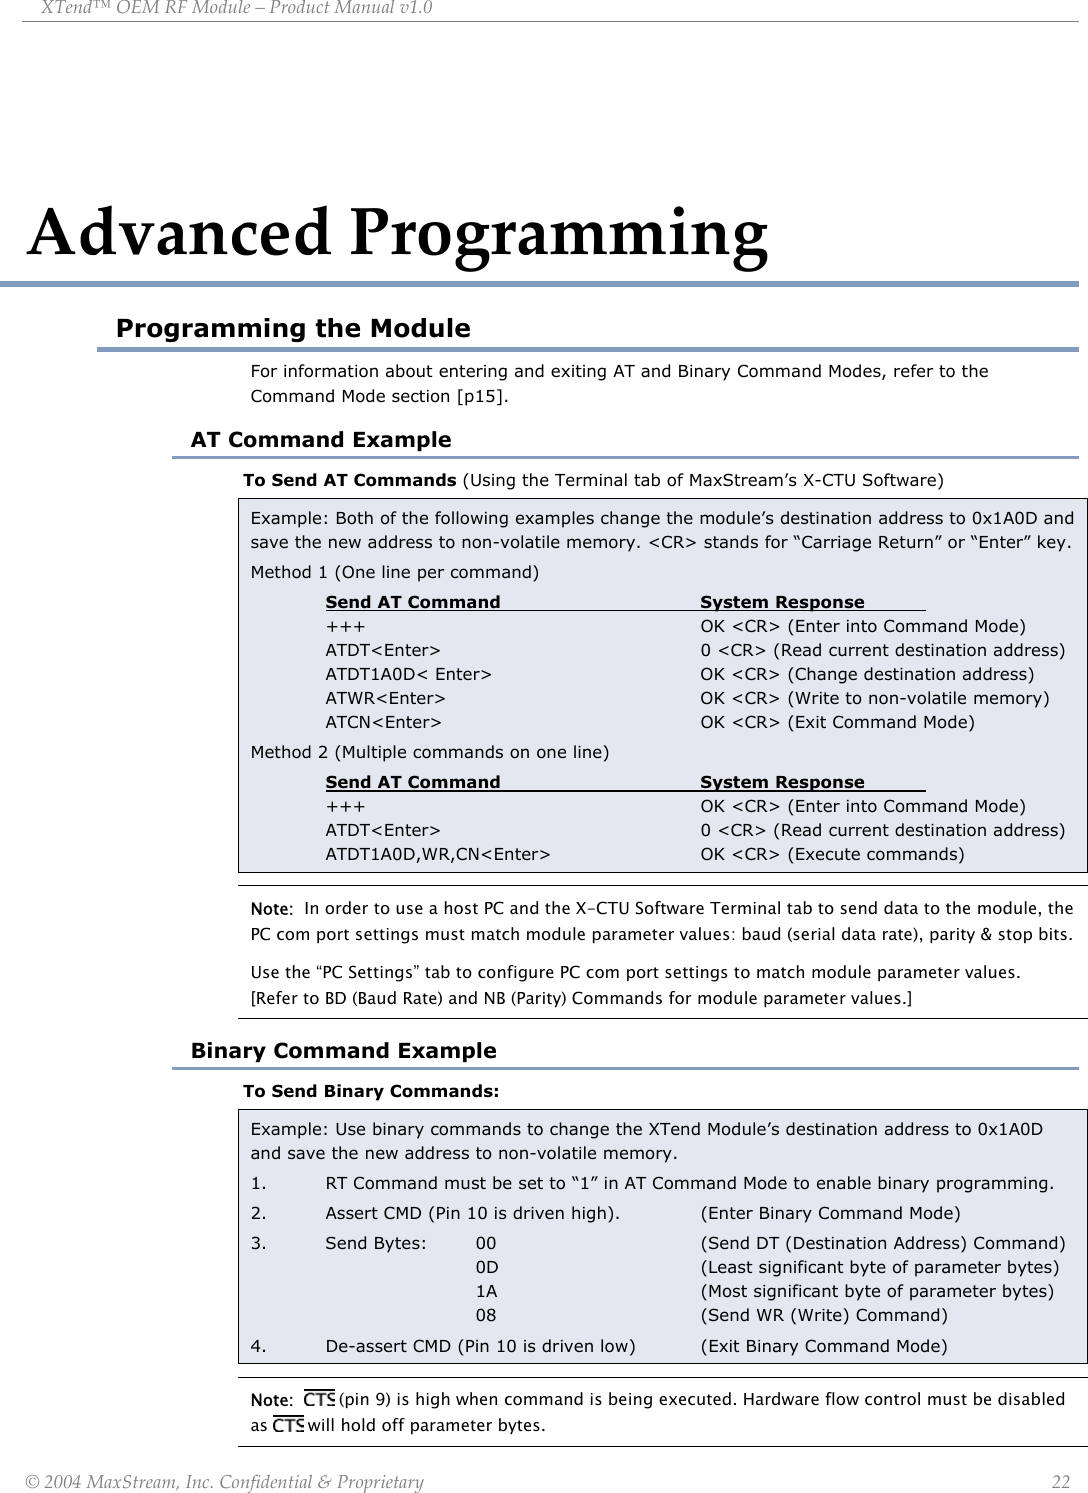 XTend™ OEM RF Module – Product Manual v1.0 Advanced Programming Programming the Module For information about entering and exiting AT and Binary Command Modes, refer to the Command Mode section [p15]. AT Command Example To Send AT Commands (Using the Terminal tab of MaxStream’s X-CTU Software) Example: Both of the following examples change the module’s destination address to 0x1A0D and save the new address to non-volatile memory. &lt;CR&gt; stands for “Carriage Return” or “Enter” key. Method 1 (One line per command) Send AT Command   System Response    +++     OK &lt;CR&gt; (Enter into Command Mode)   ATDT&lt;Enter&gt;        0 &lt;CR&gt; (Read current destination address)   ATDT1A0D&lt; Enter&gt;      OK &lt;CR&gt; (Change destination address)  ATWR&lt;Enter&gt;    OK &lt;CR&gt; (Write to non-volatile memory)  ATCN&lt;Enter&gt;    OK &lt;CR&gt; (Exit Command Mode)   Method 2 (Multiple commands on one line)  Send AT Command   System Response    +++     OK &lt;CR&gt; (Enter into Command Mode)   ATDT&lt;Enter&gt;        0 &lt;CR&gt; (Read current destination address)  ATDT1A0D,WR,CN&lt;Enter&gt;  OK &lt;CR&gt; (Execute commands) Note:  In order to use a host PC and the X-CTU Software Terminal tab to send data to the module, the PC com port settings must match module parameter values: baud (serial data rate), parity &amp; stop bits.  Use the “PC Settings” tab to configure PC com port settings to match module parameter values.  [Refer to BD (Baud Rate) and NB (Parity) Commands for module parameter values.] Binary Command Example To Send Binary Commands: Example: Use binary commands to change the XTend Module’s destination address to 0x1A0D and save the new address to non-volatile memory. 1.  RT Command must be set to “1” in AT Command Mode to enable binary programming. 2.  Assert CMD (Pin 10 is driven high).   (Enter Binary Command Mode) 3. Send Bytes: 00   (Send DT (Destination Address) Command)    0D   (Least significant byte of parameter bytes)    1A   (Most significant byte of parameter bytes)    08   (Send WR (Write) Command) 4.  De-assert CMD (Pin 10 is driven low)  (Exit Binary Command Mode) Note:    (pin 9) is high when command is being executed. Hardware flow control must be disabled as   will hold off parameter bytes. © 2004 MaxStream, Inc. Confidential &amp; Proprietary                 22 